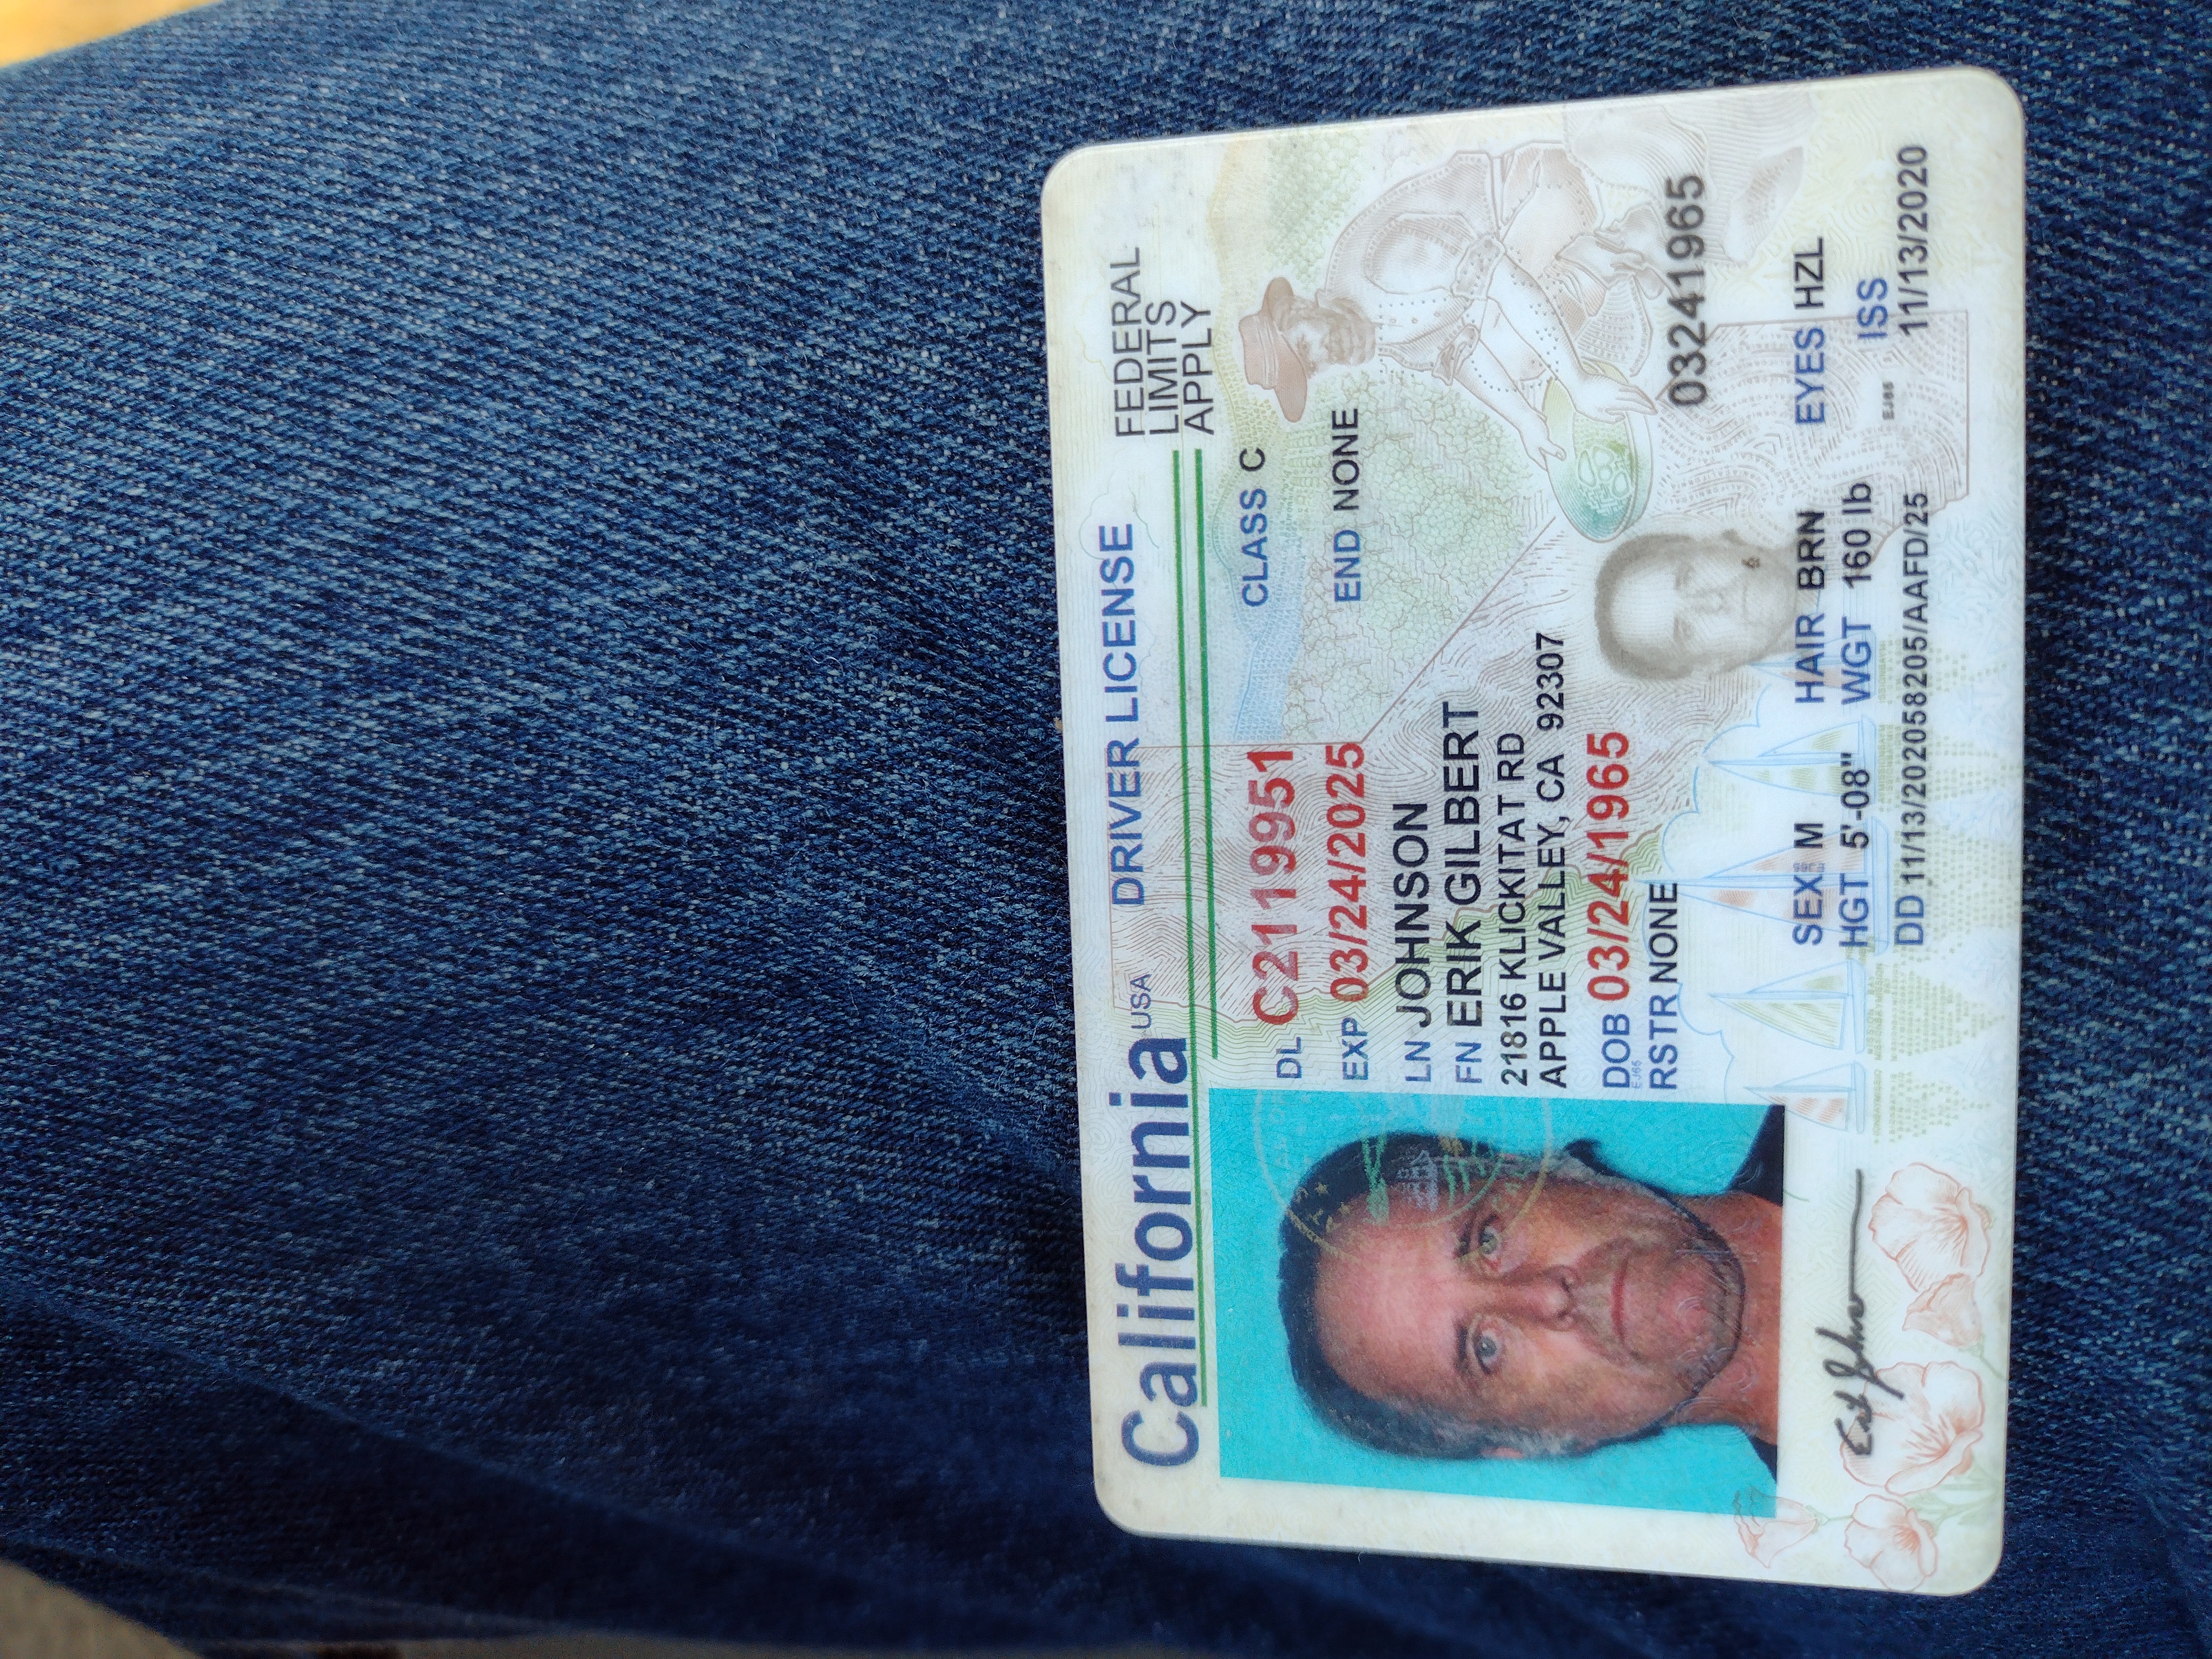 Upload a photo of your Driver's License